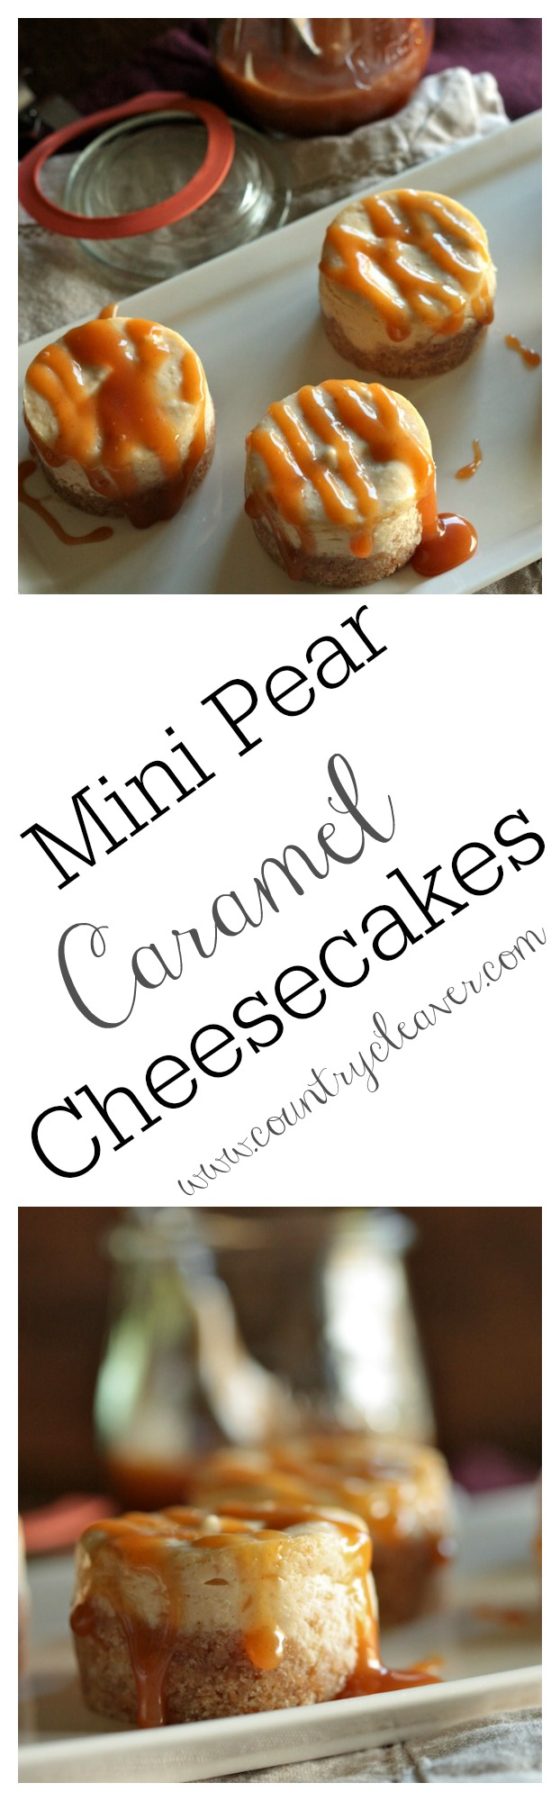 Mini Pear Caramel Cheesecakes- www.countrycleaver.com